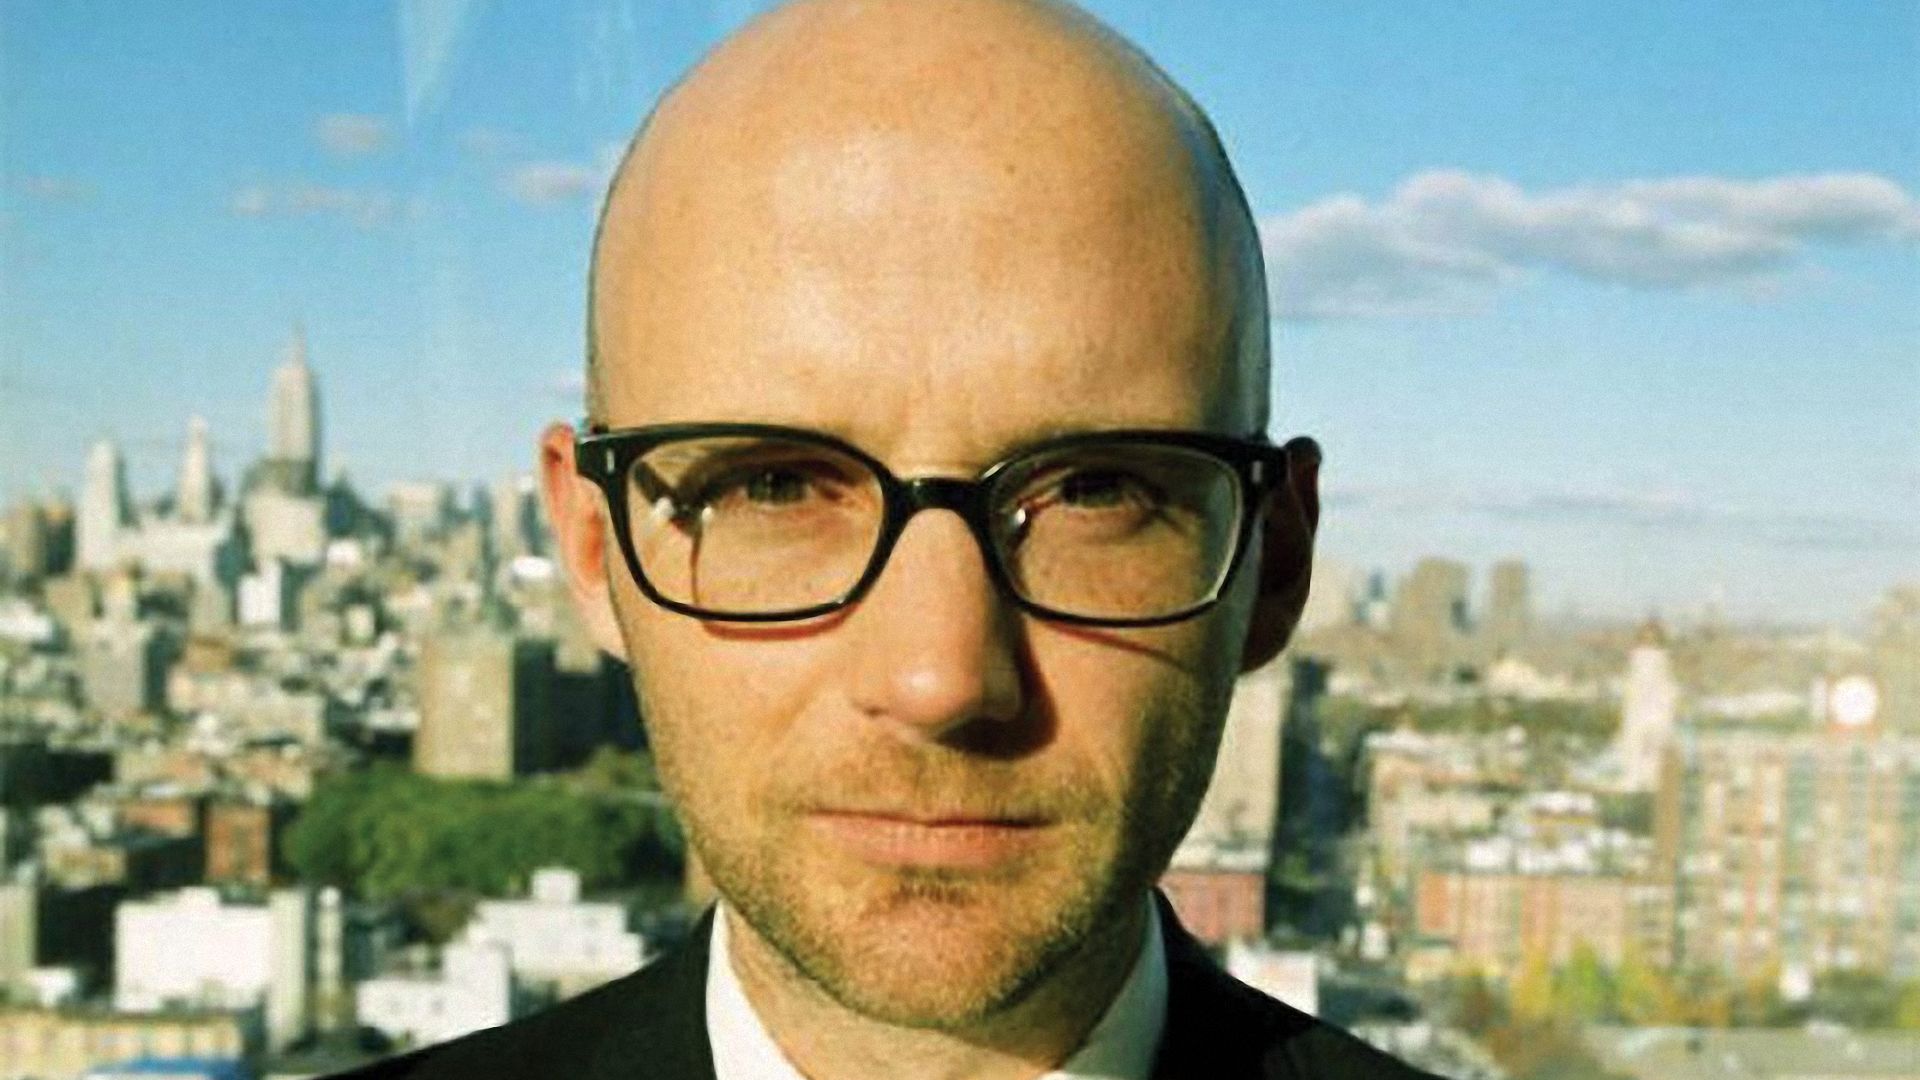 Tonight: Moby